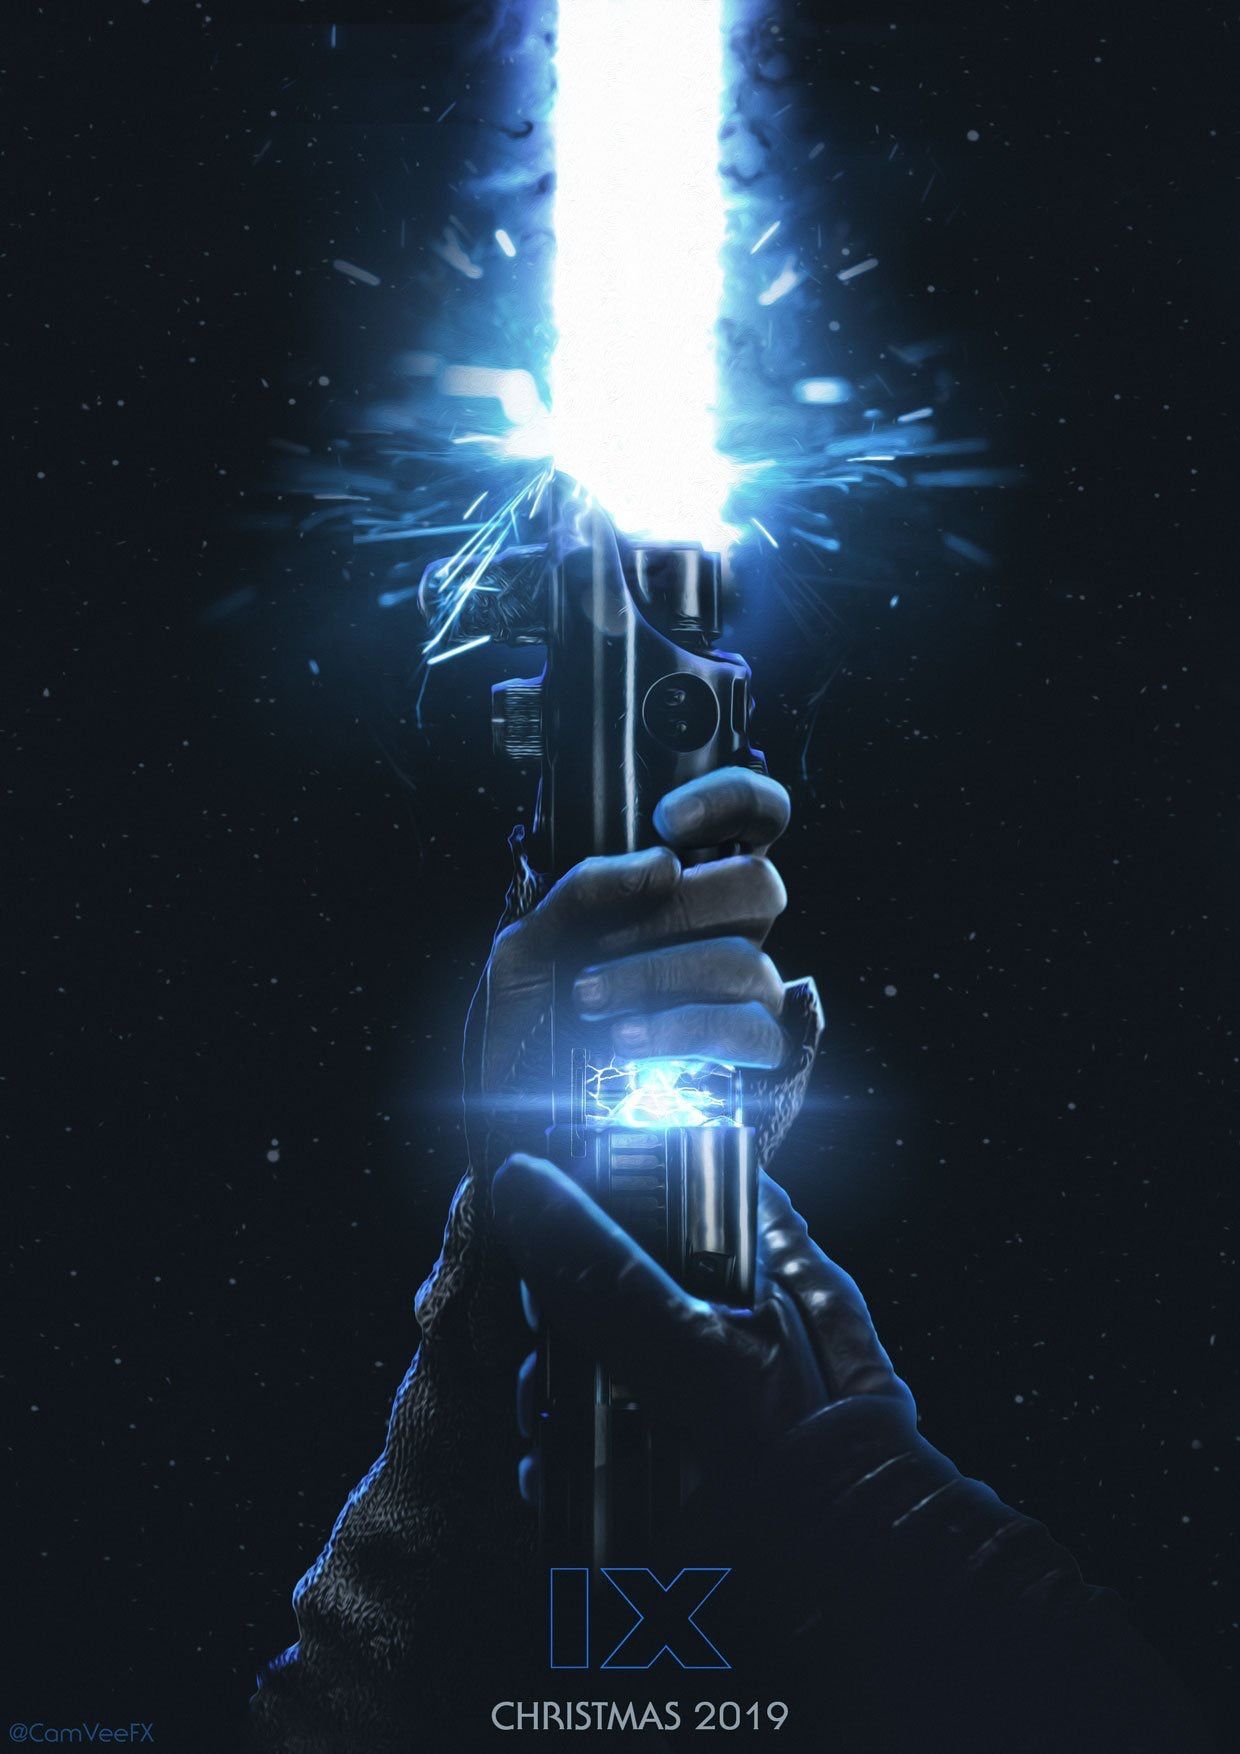 the two of them who broken it, so they were both responsible for repairing Anakin's Lightsaber together. Star wars wallpaper, Star wars background, Star wars art